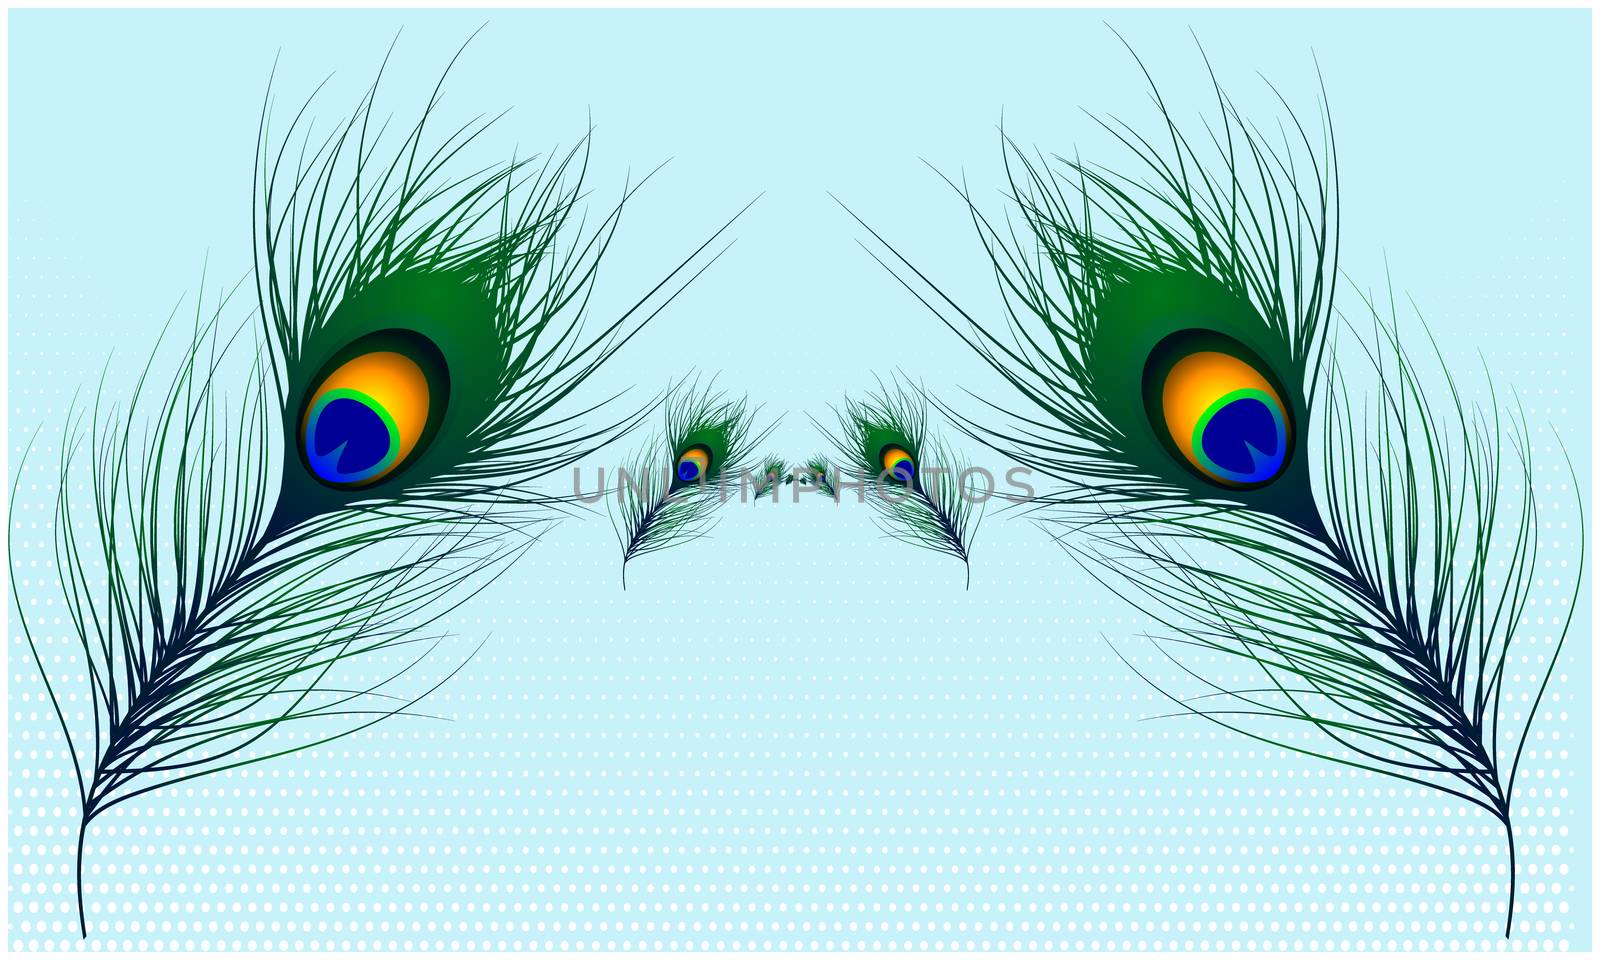 vector design of peacock hair on light abstract background by aanavcreationsplus